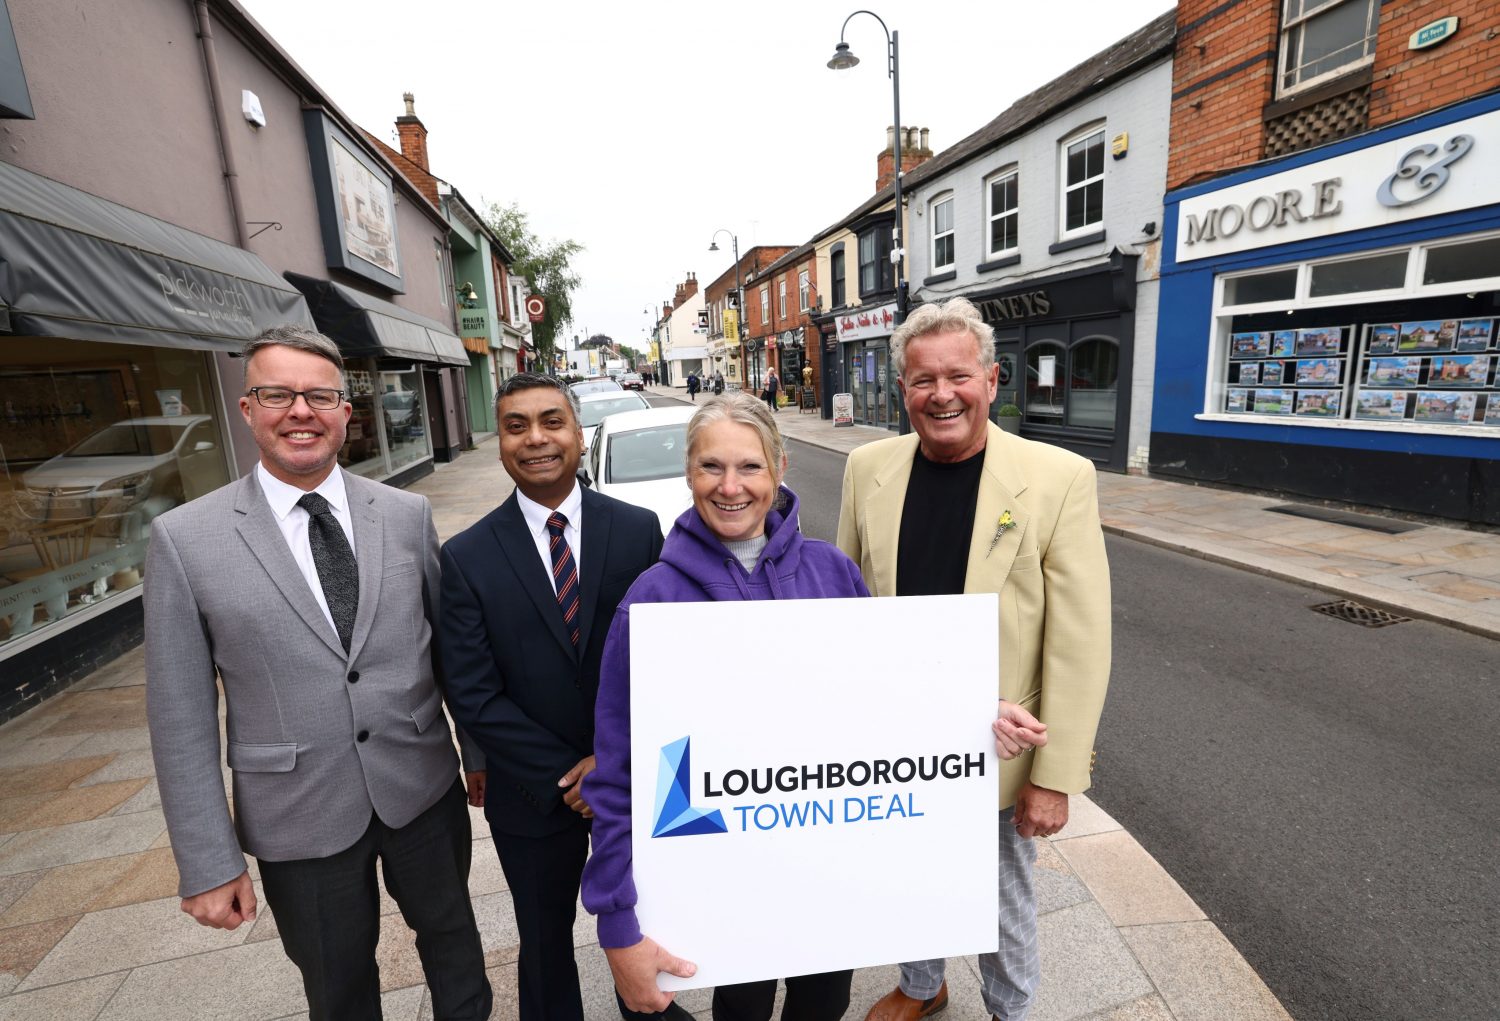 Visitors to Loughborough will be able to enjoy free wi-fi throughout the town centre thanks to the Living Loughborough project.